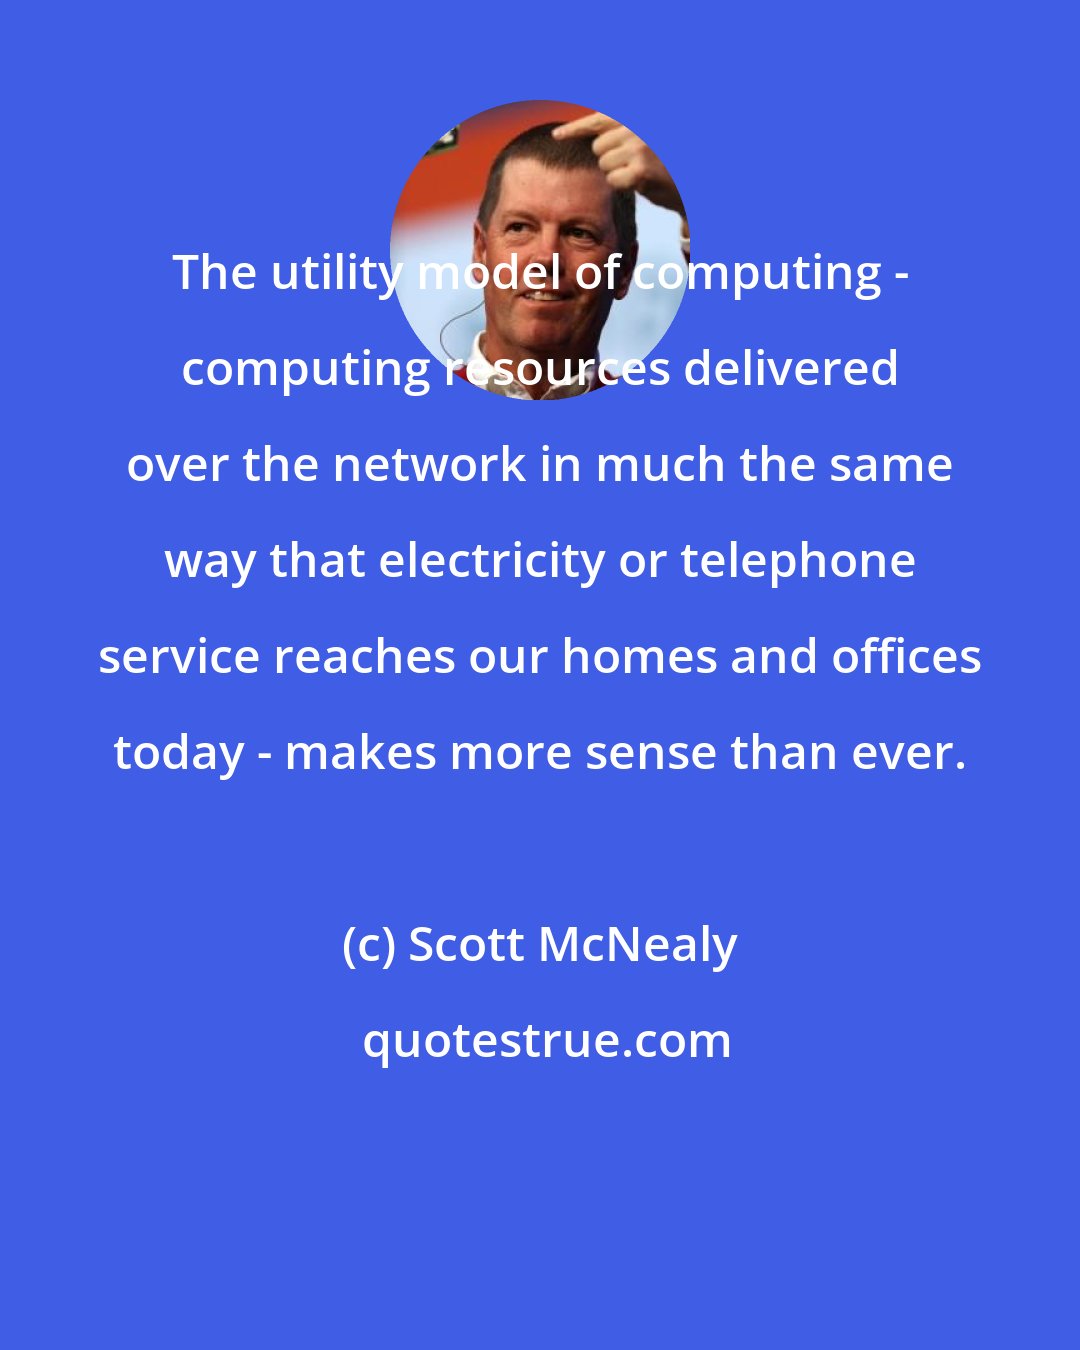 Scott McNealy: The utility model of computing - computing resources delivered over the network in much the same way that electricity or telephone service reaches our homes and offices today - makes more sense than ever.